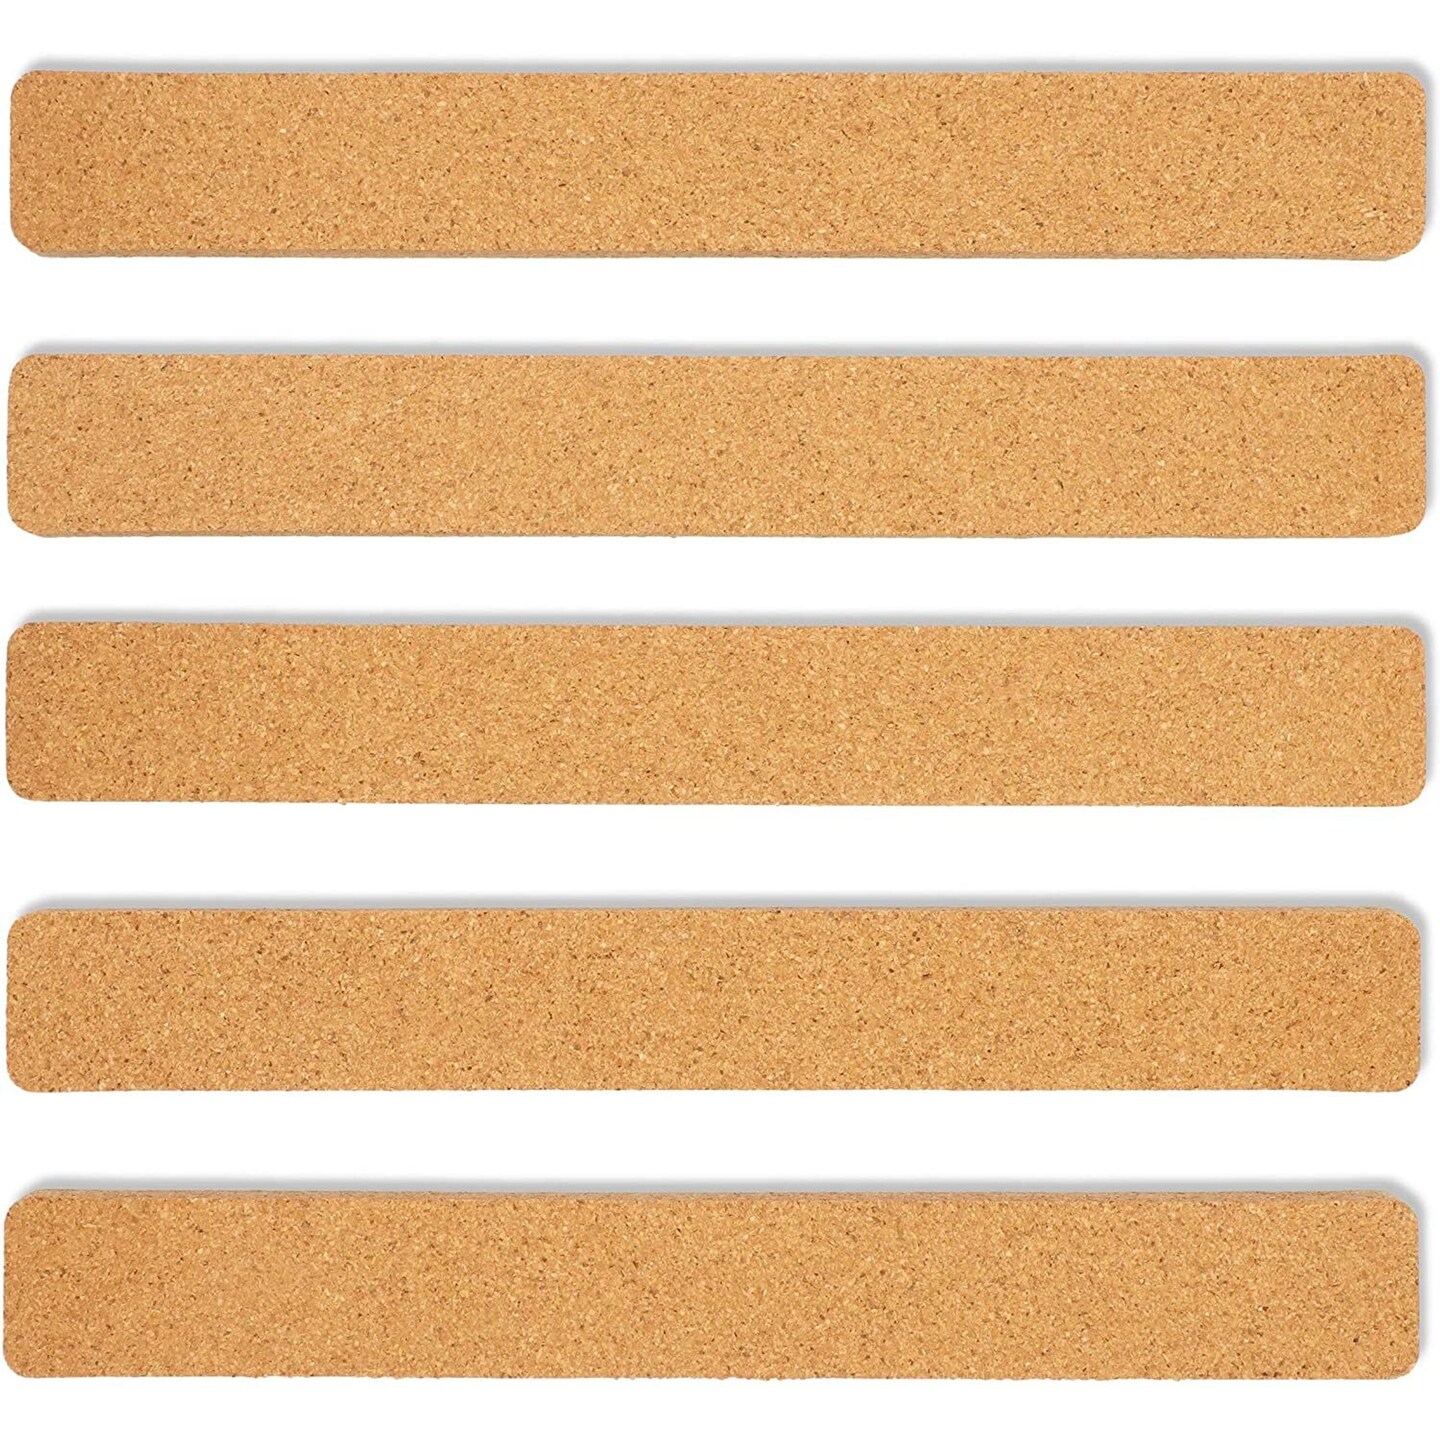 6 Pack Cork Board Strips for Walls - Adhesive Bulletin Board Bar Strips, 12x1.5 inch, 0.8 inch Thick - Natural Cork Boards for Office, Home, Classroom - Ideal for Notes and Photos